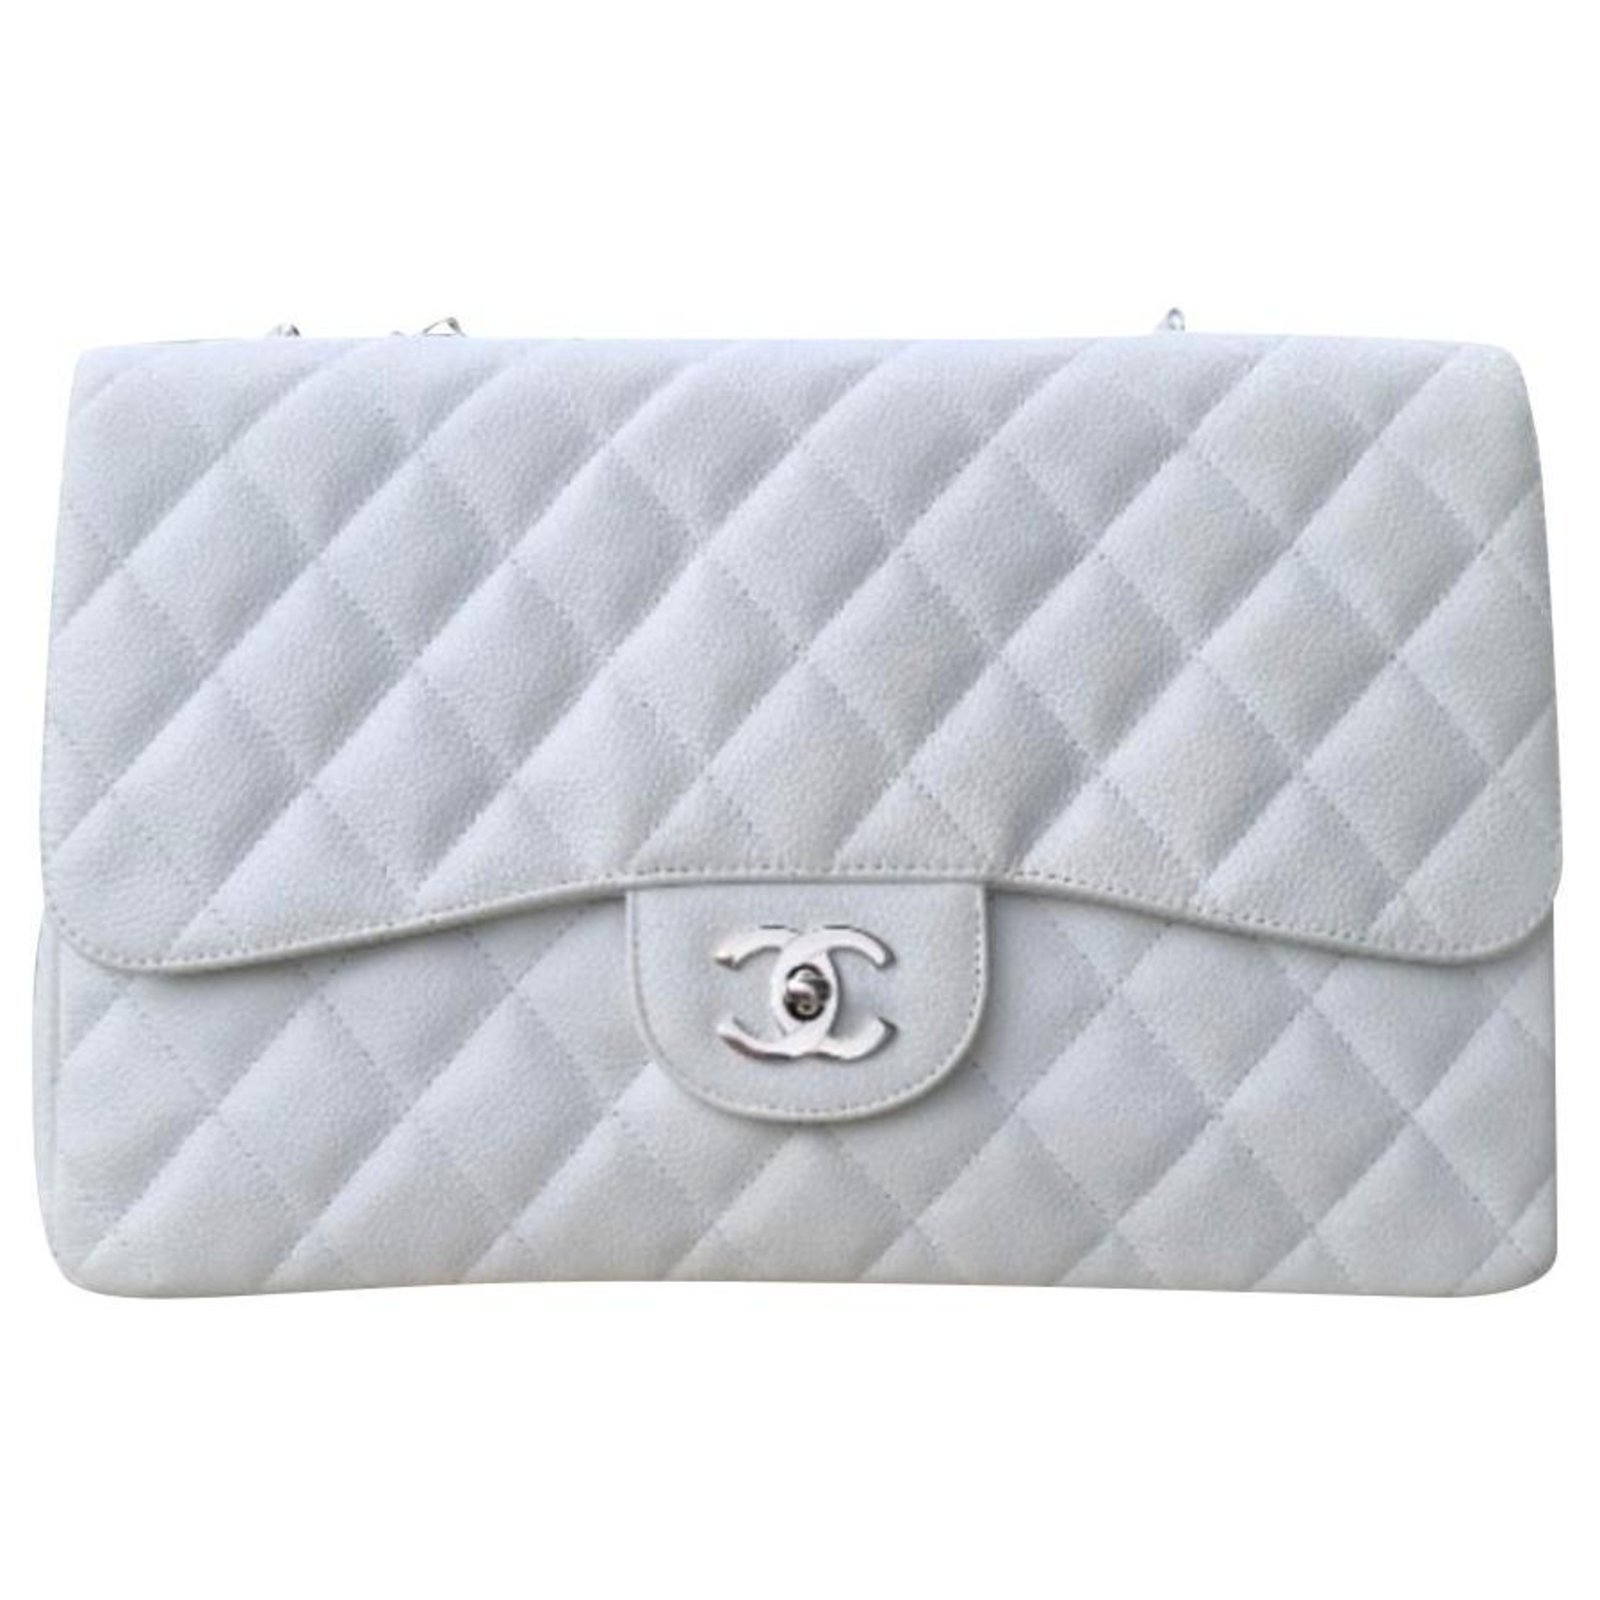 Timeless Chanel Classic Jumbo White Caviar bag SHW Leather ref